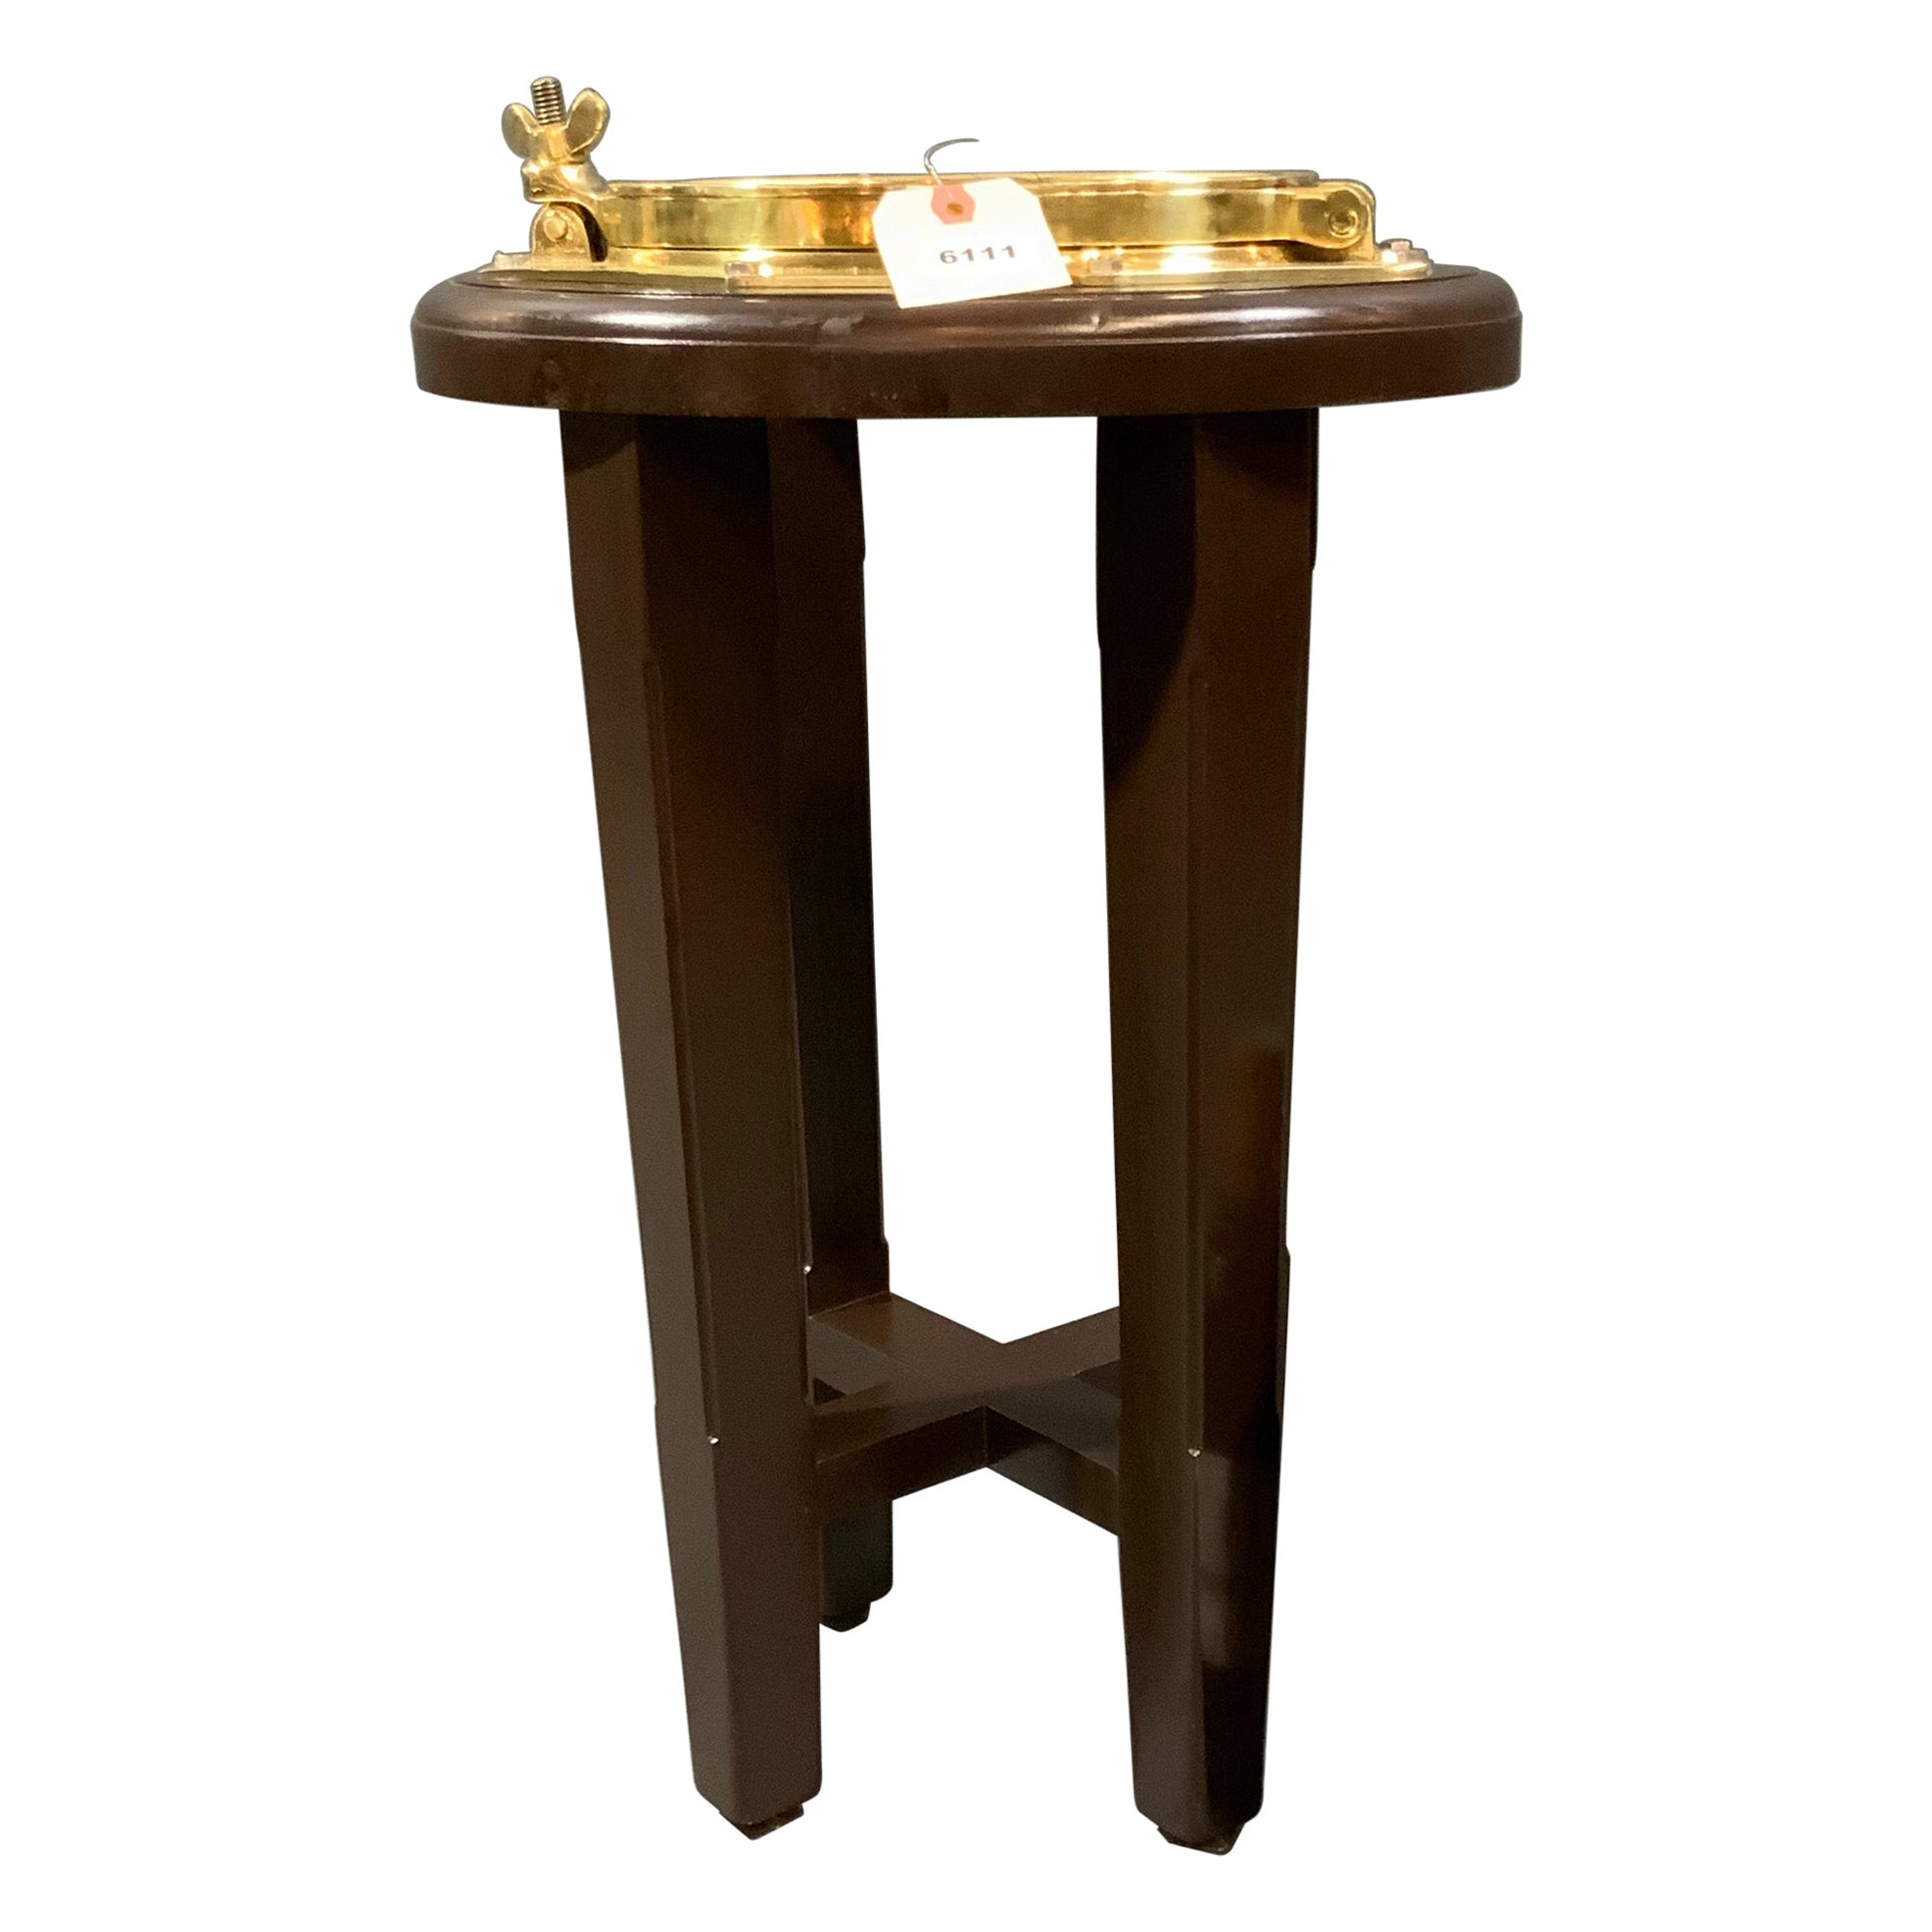 Authentic Solid Brass Boat Porthole Table